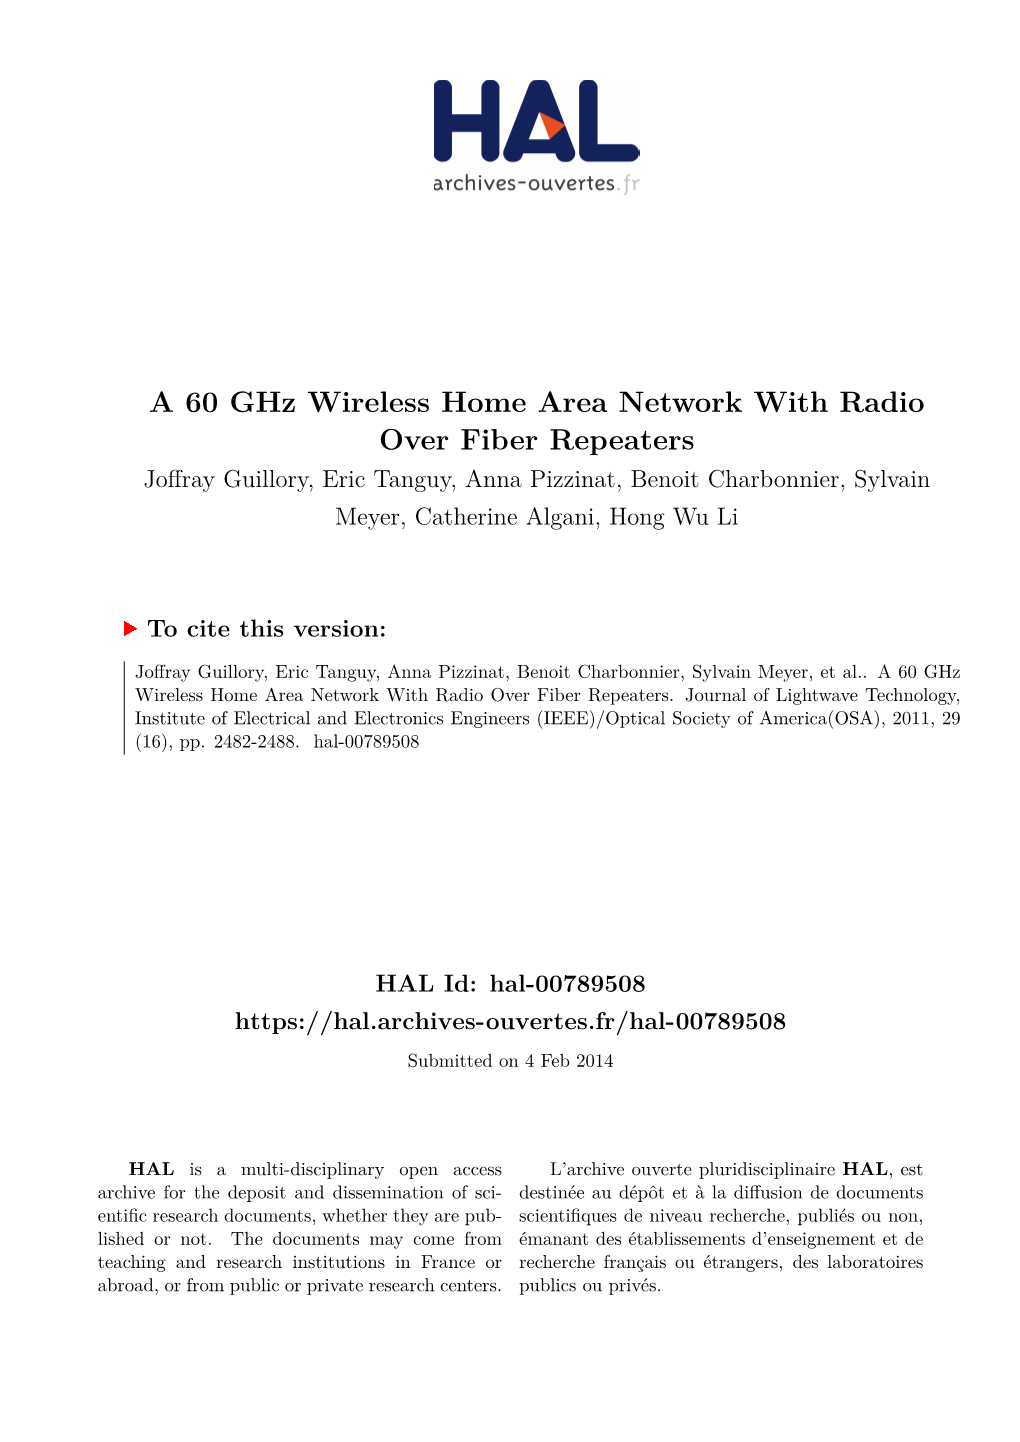 A 60 Ghz Wireless Home Area Network with Radio Over Fiber